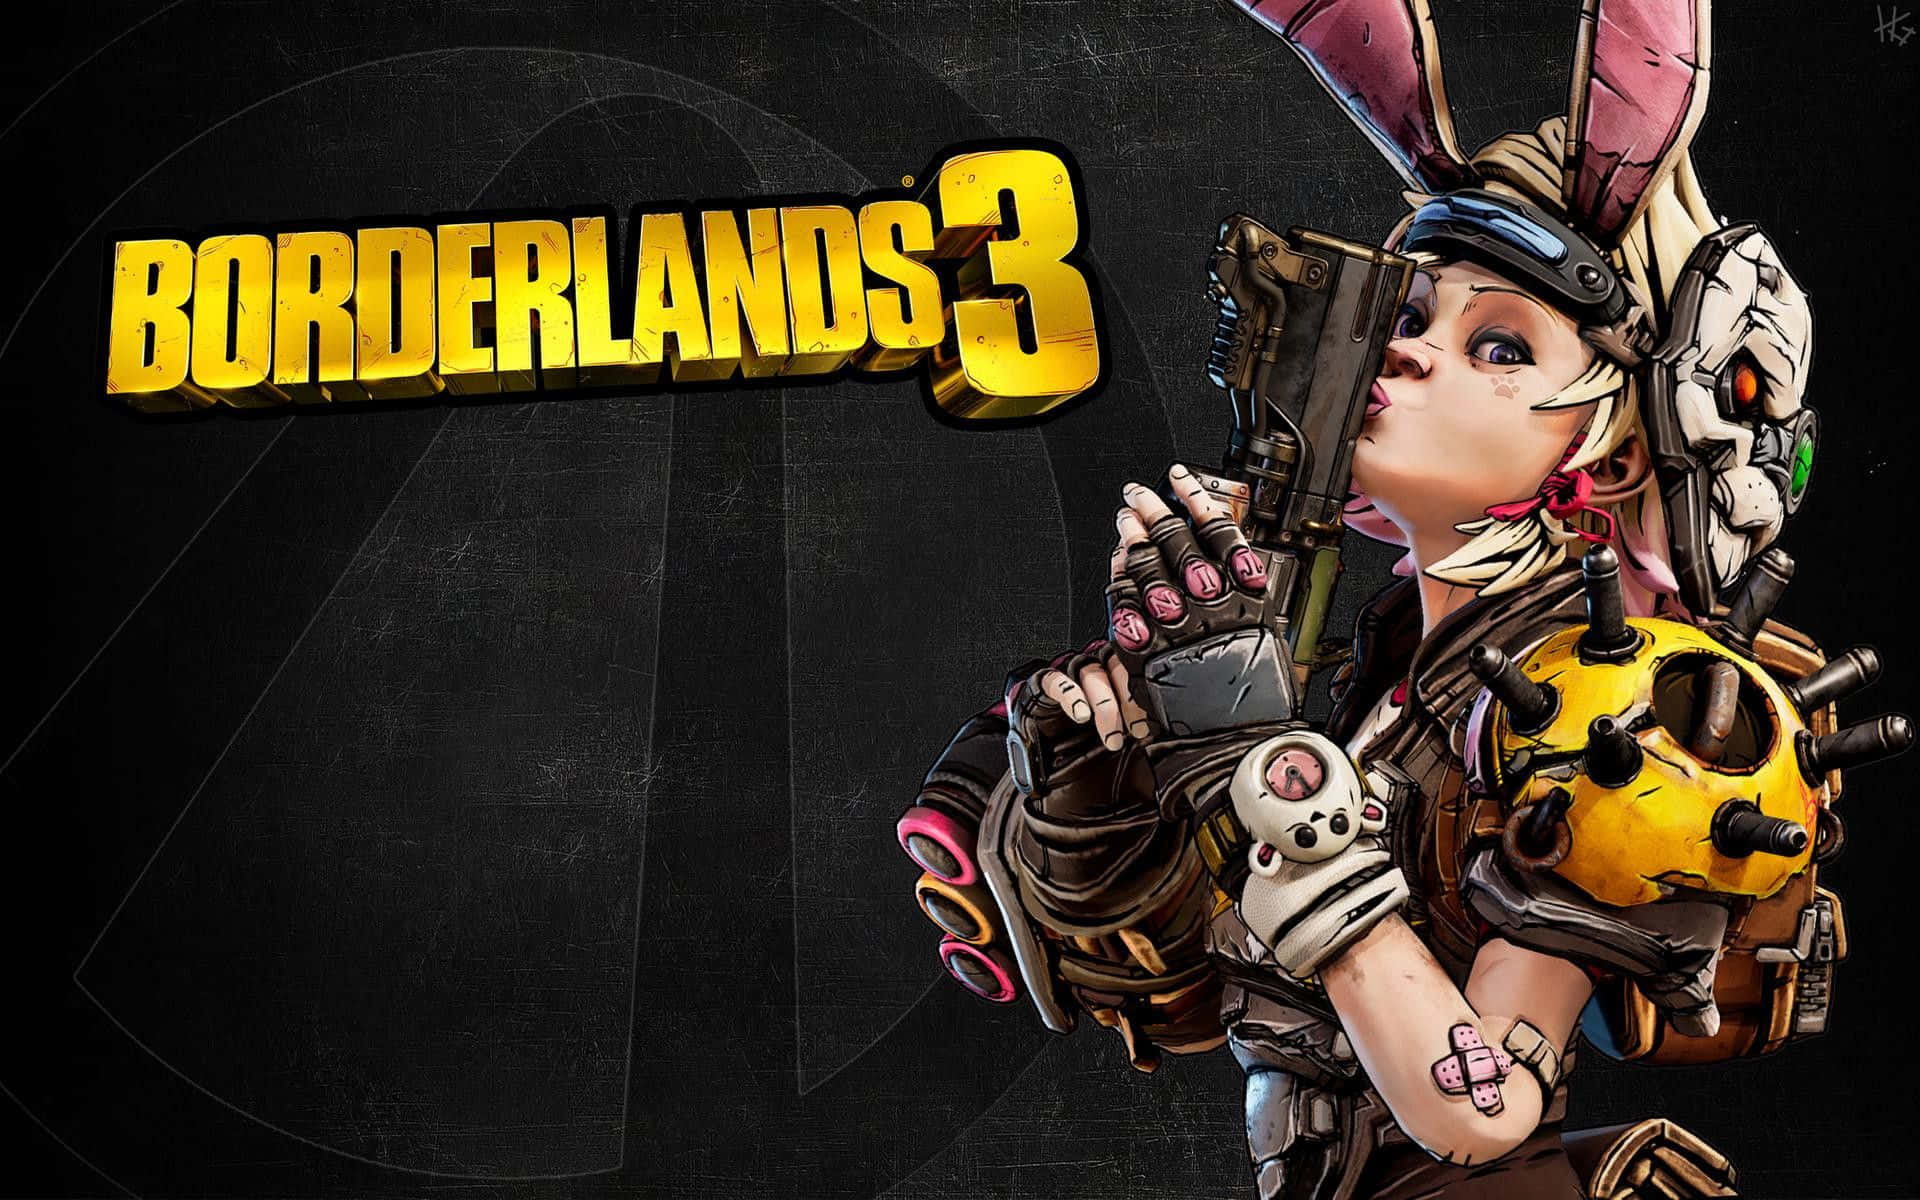 Thrilling adventure in the world of Borderlands